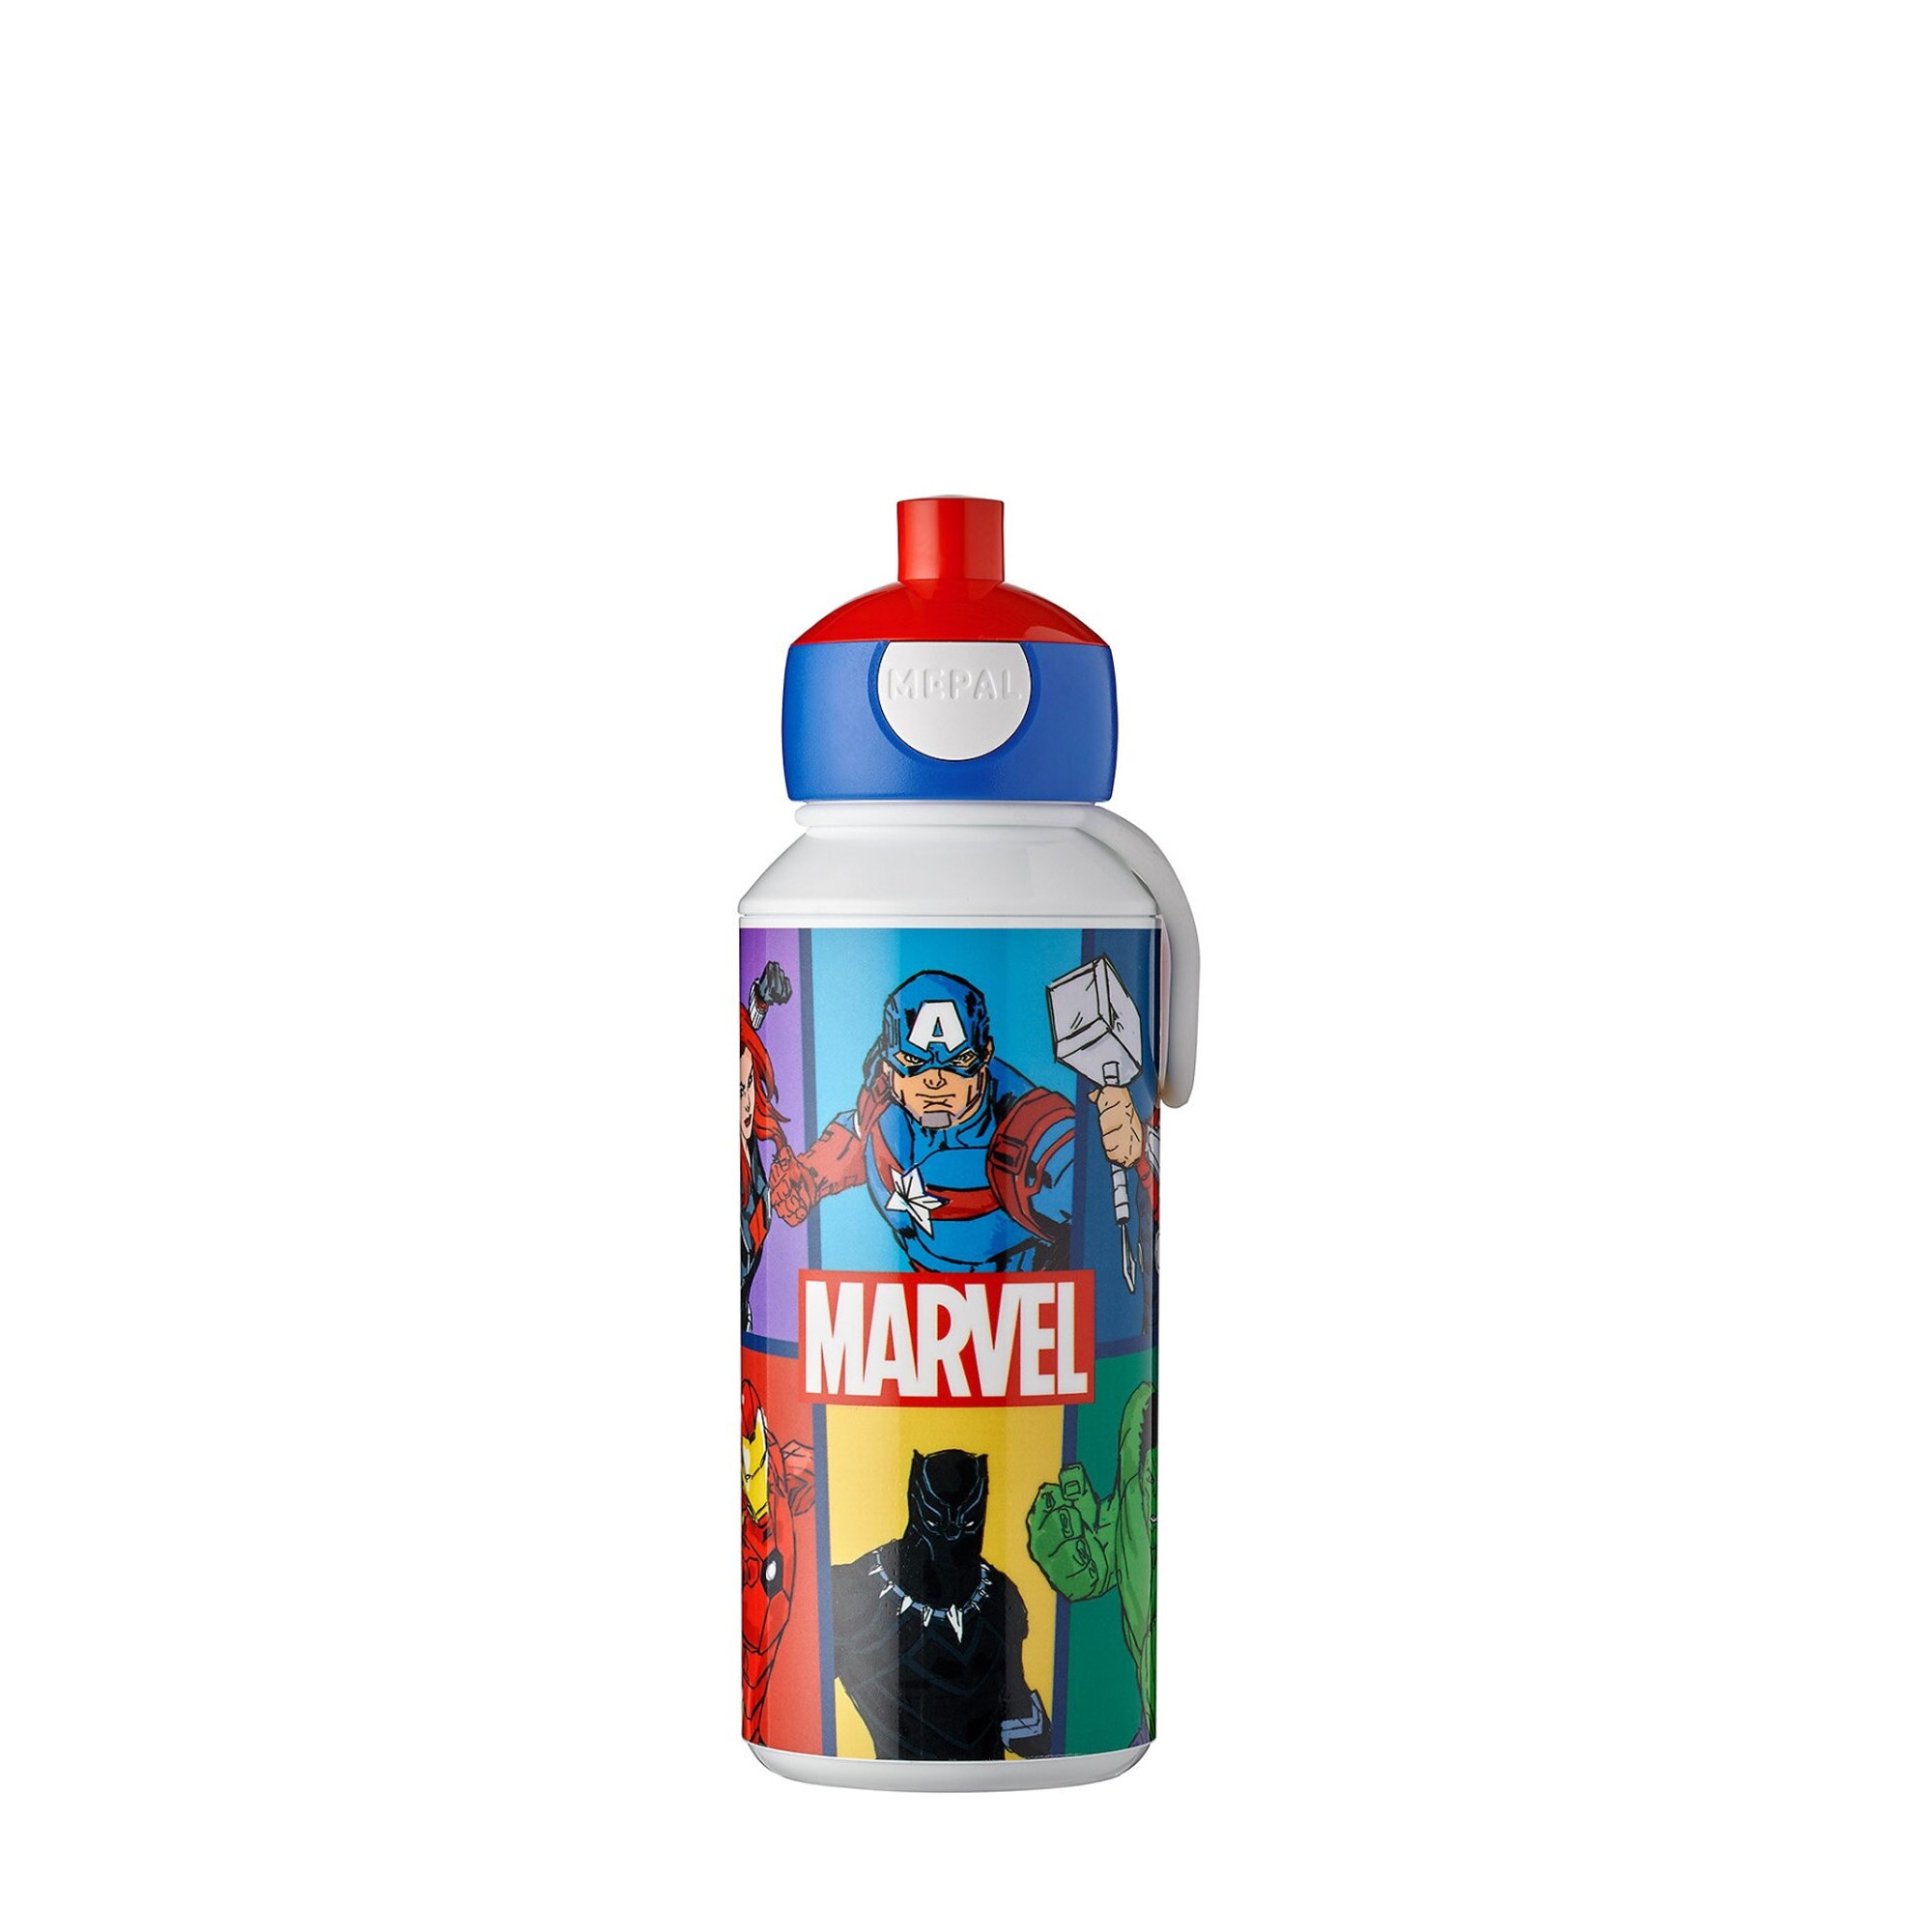 Mepal - Campus N Avengers - different products